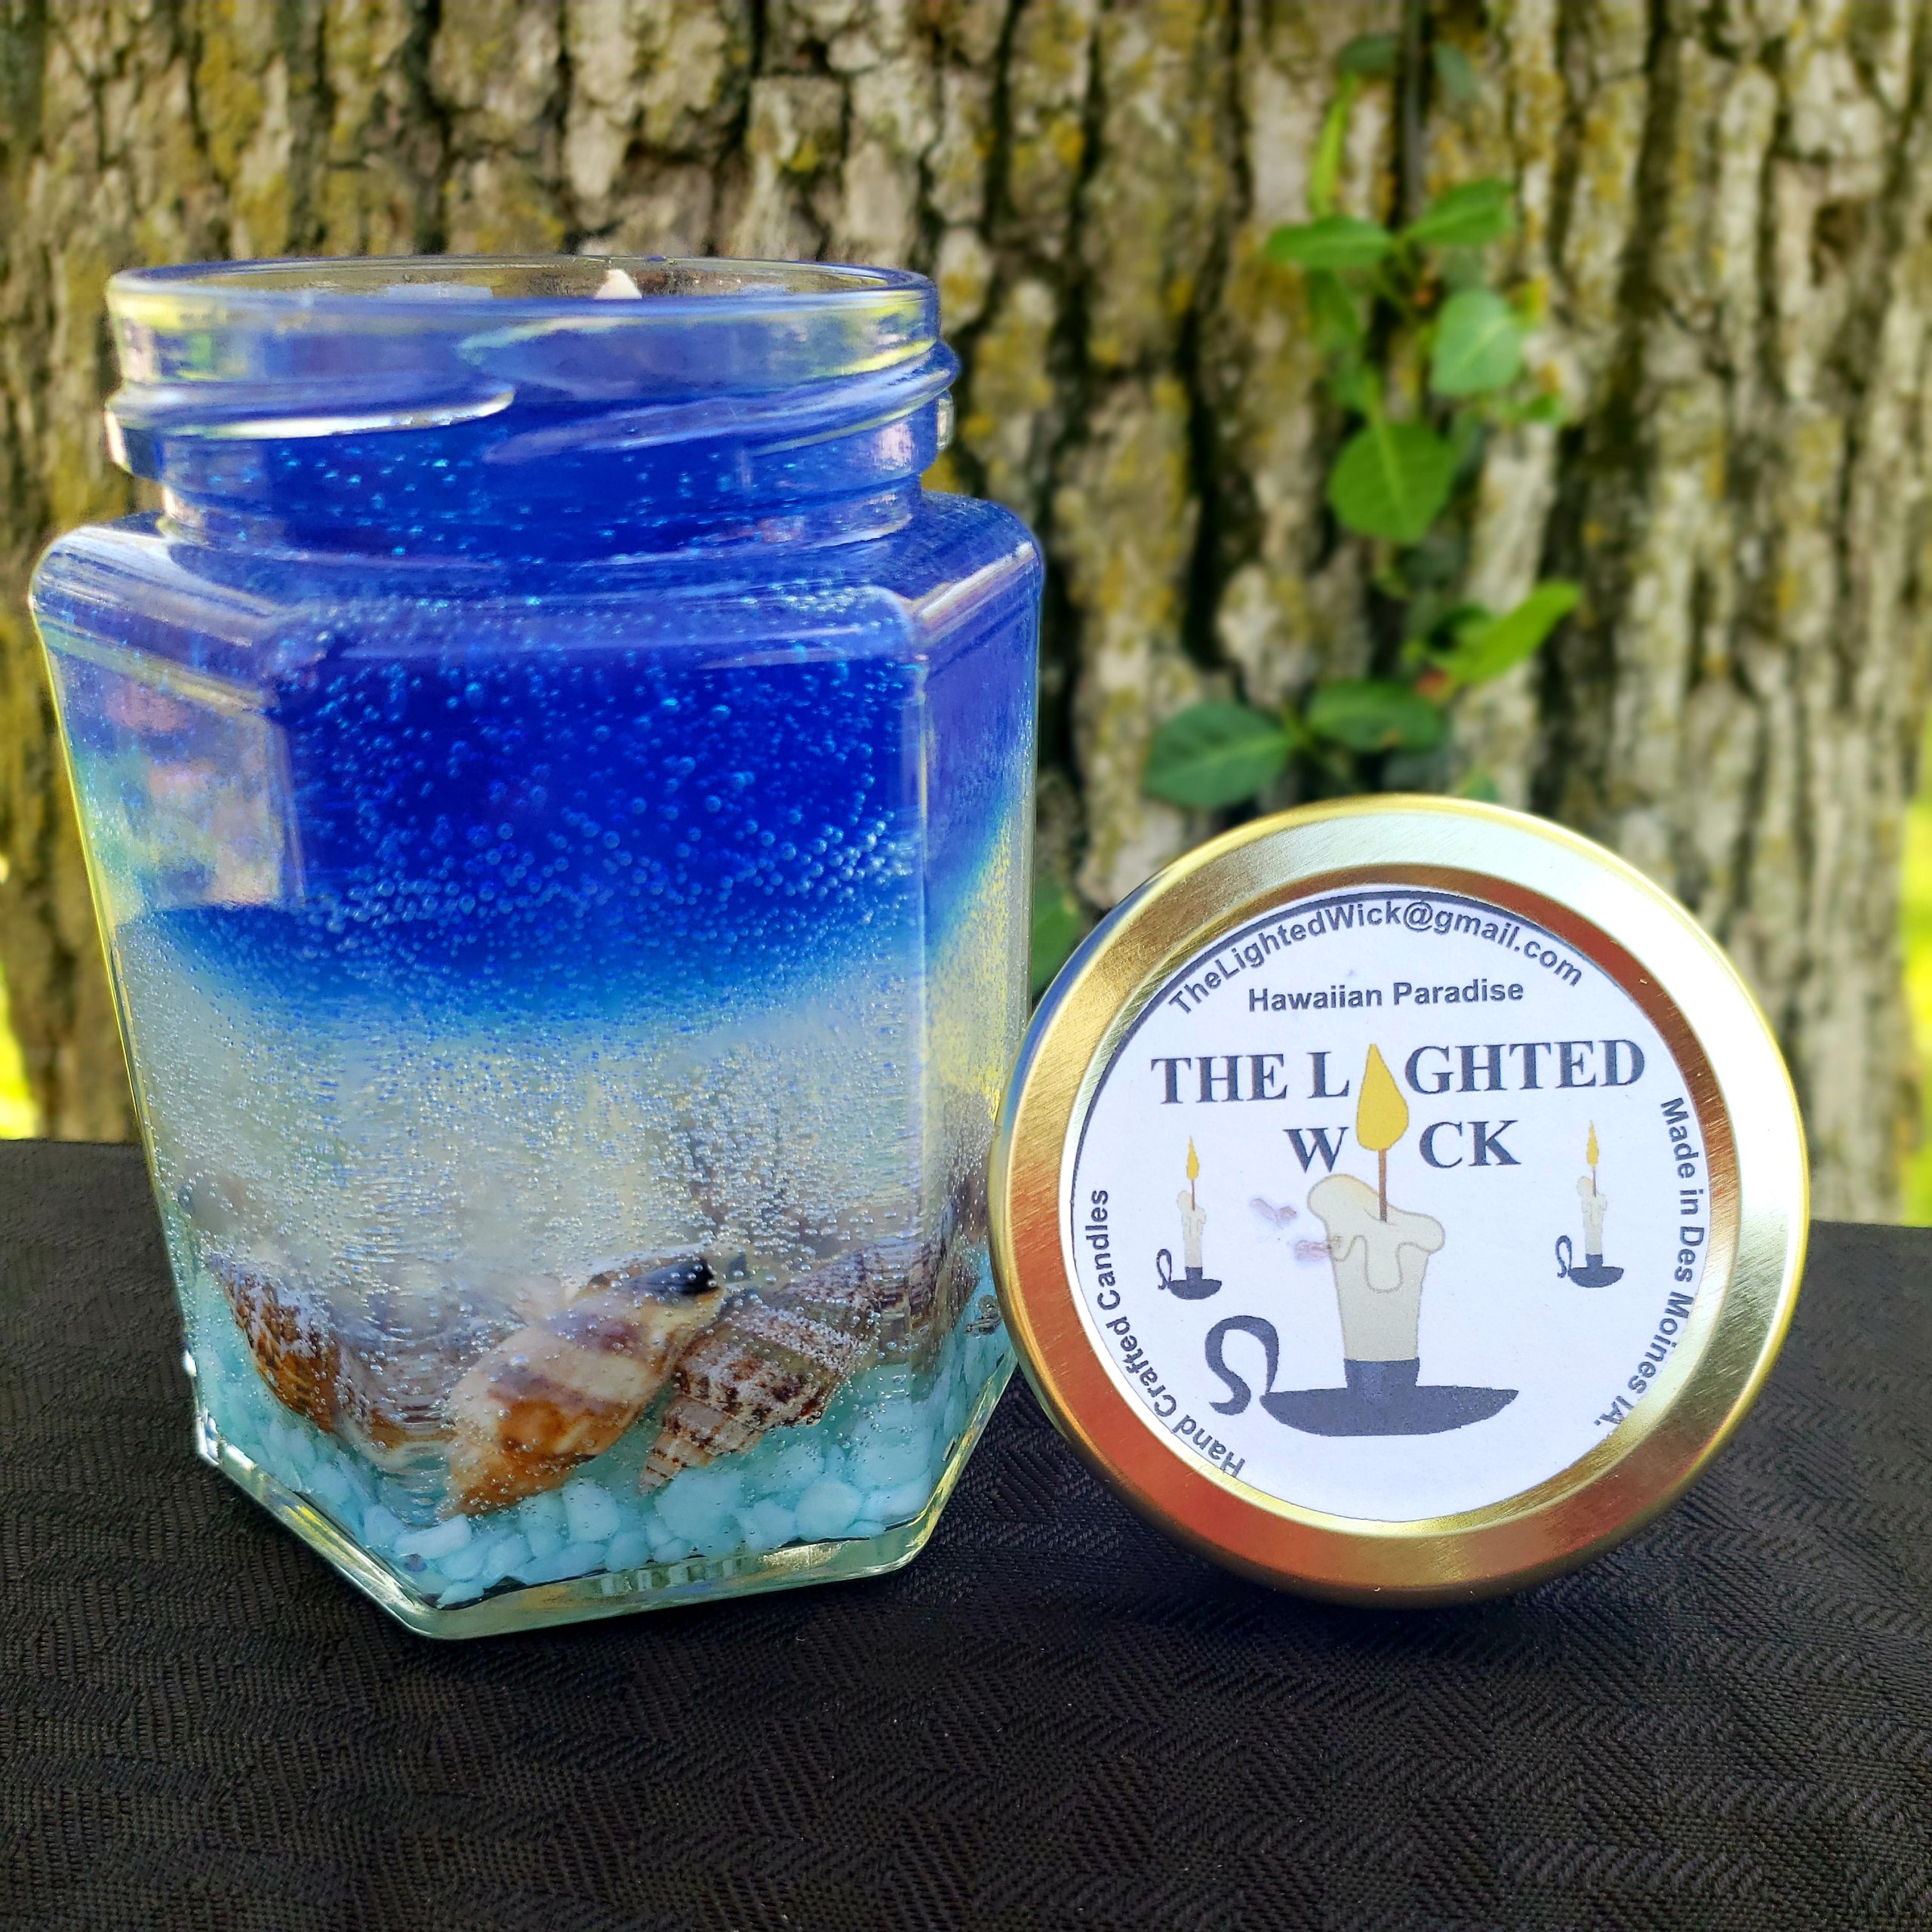 The Lighted Wick